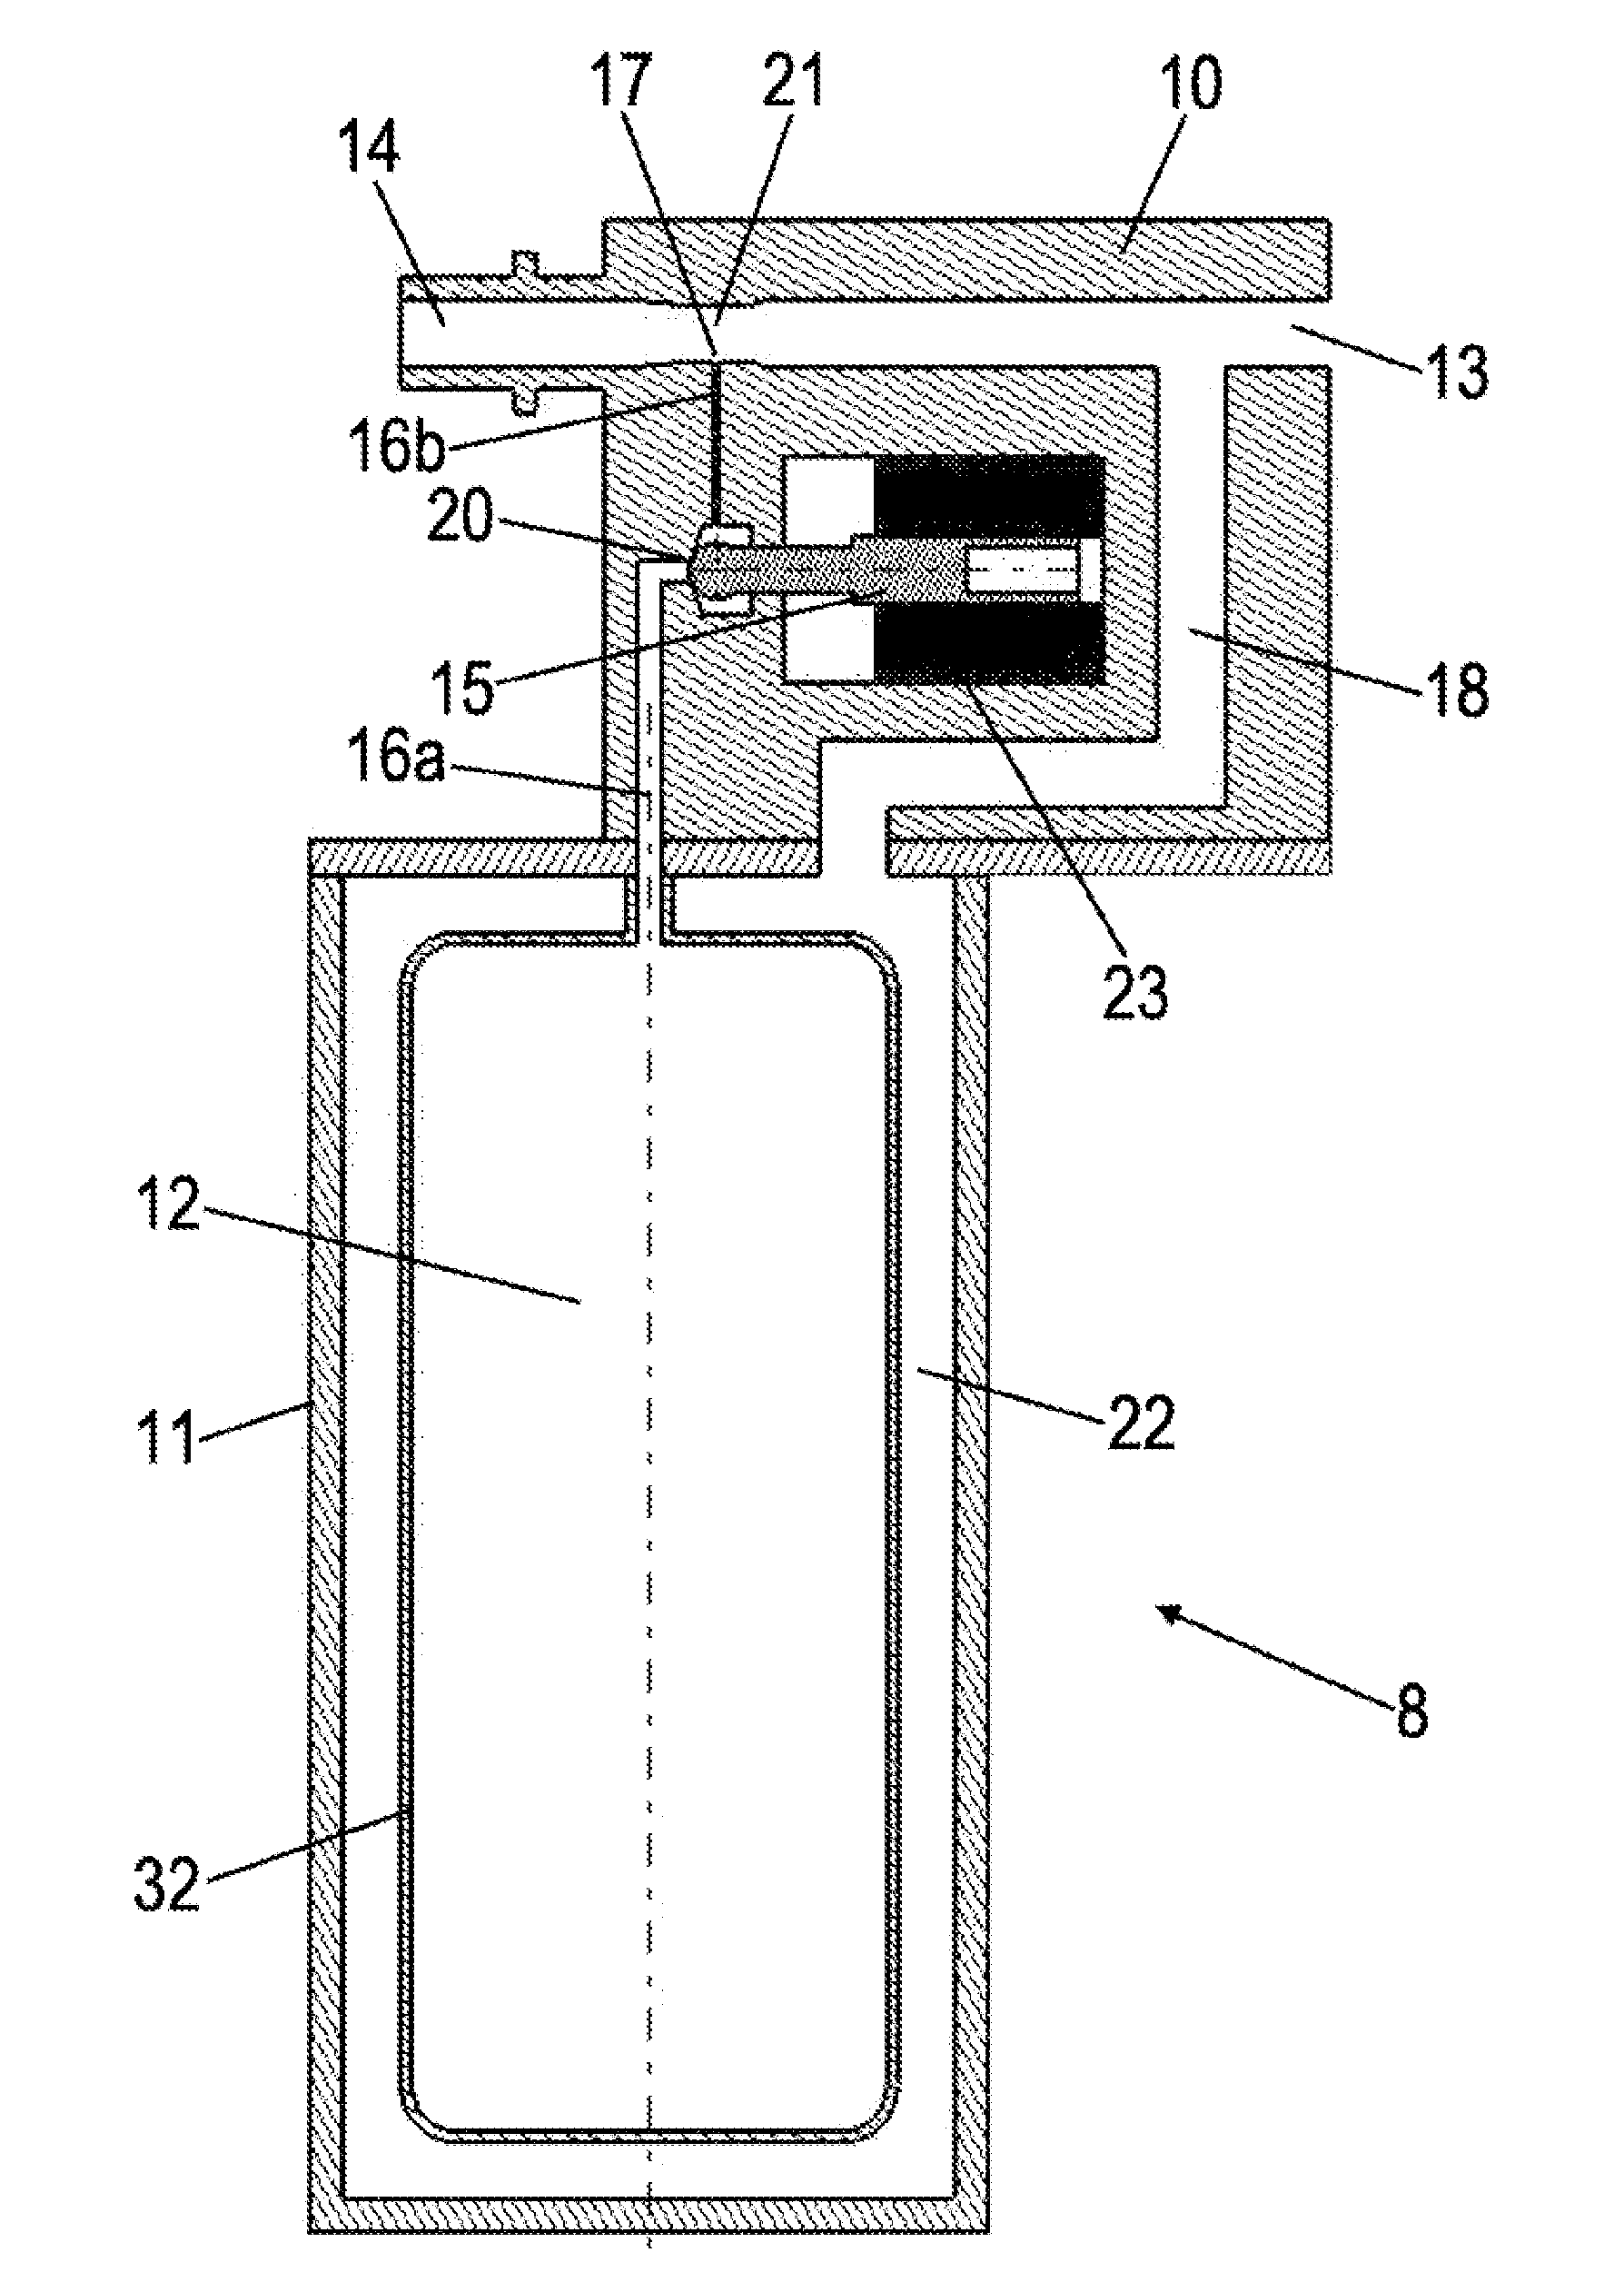 Device for dispensing an additive